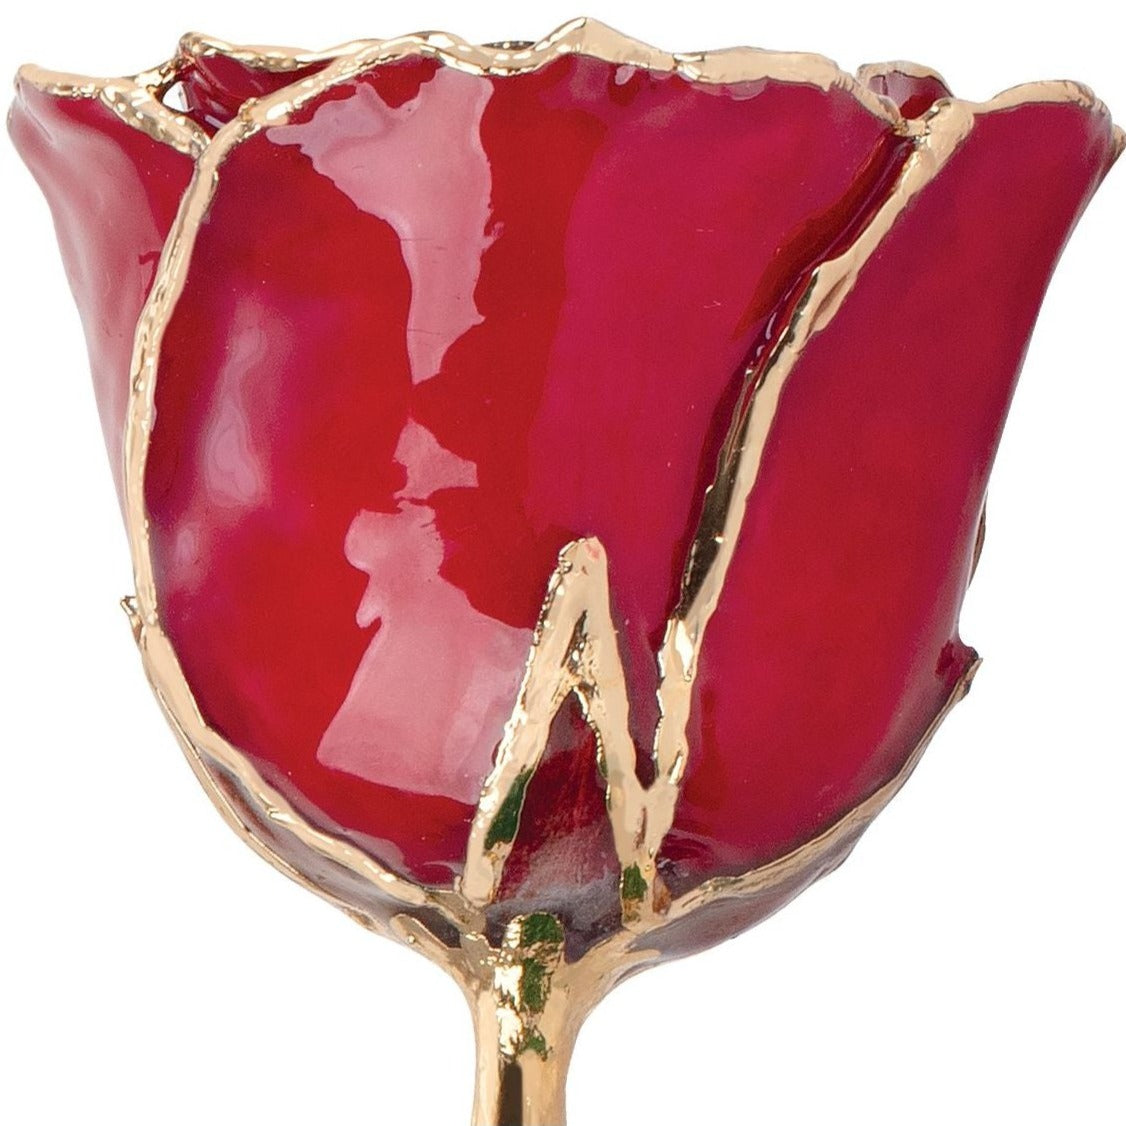 Preserved Ruby Colored Rose with 24K Gold Trim for Luxury Home Decor